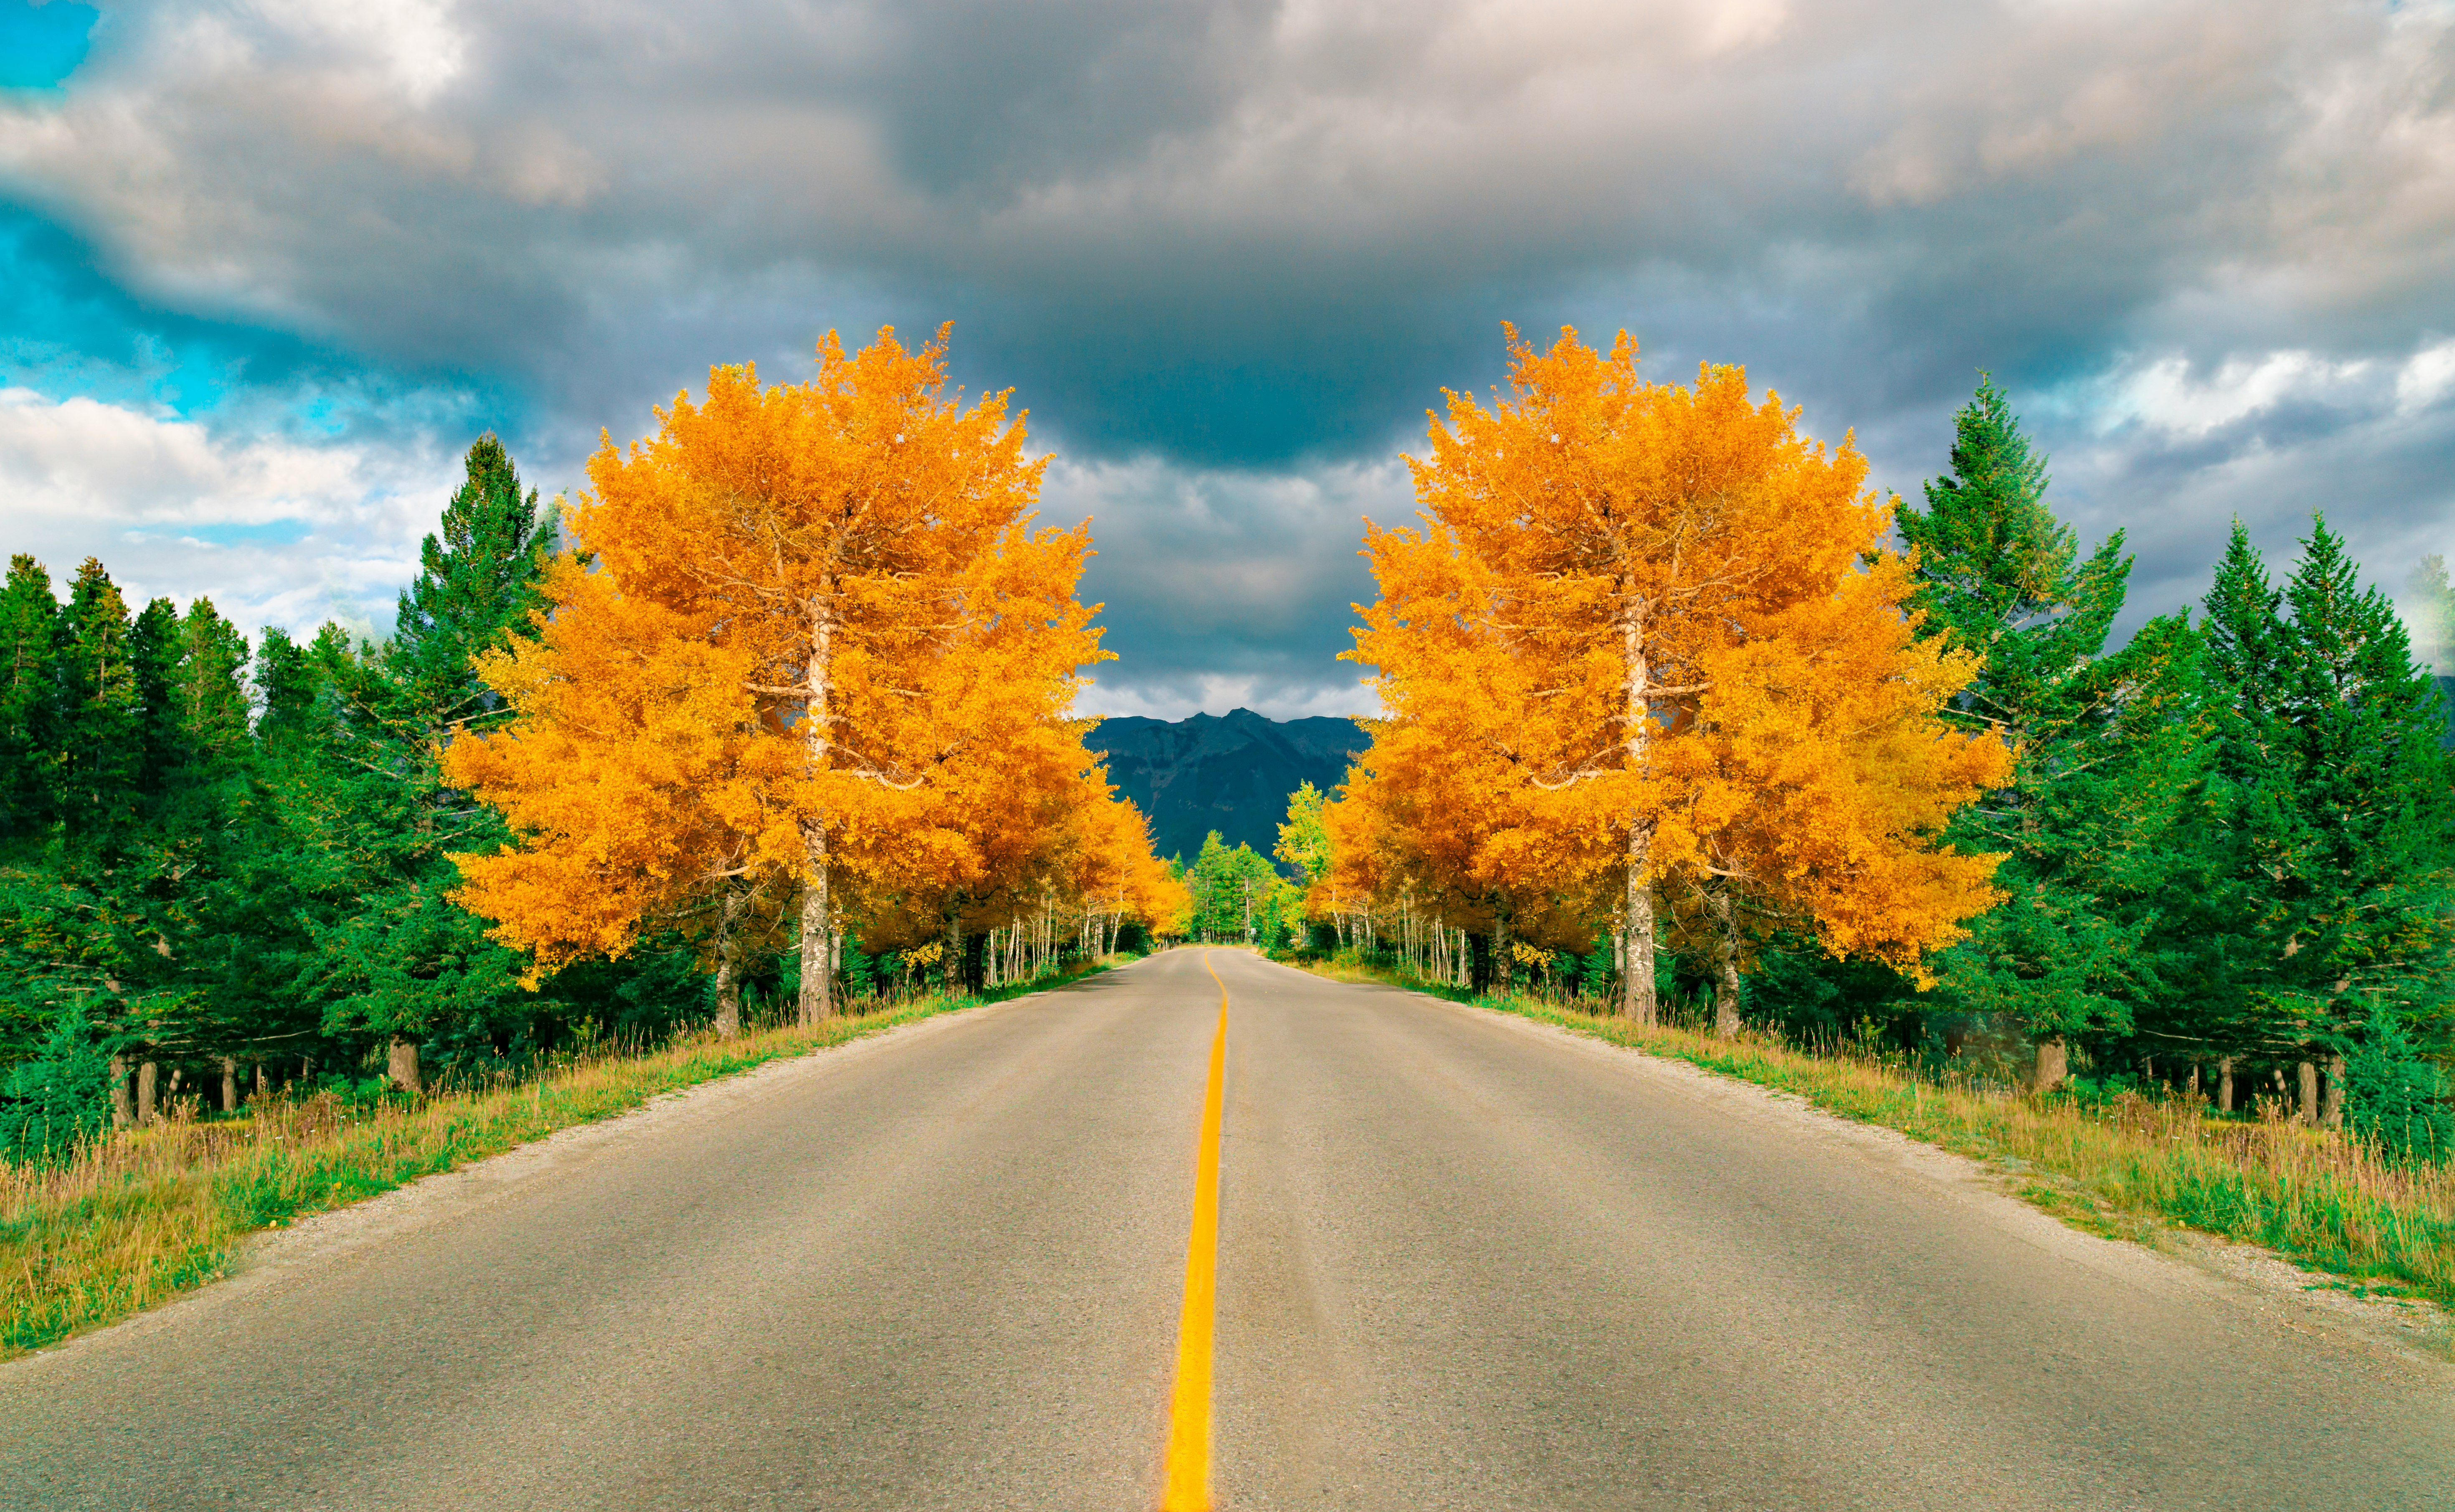 gray asphalt road between green and yellow trees under blue and white cloudy sky during daytime